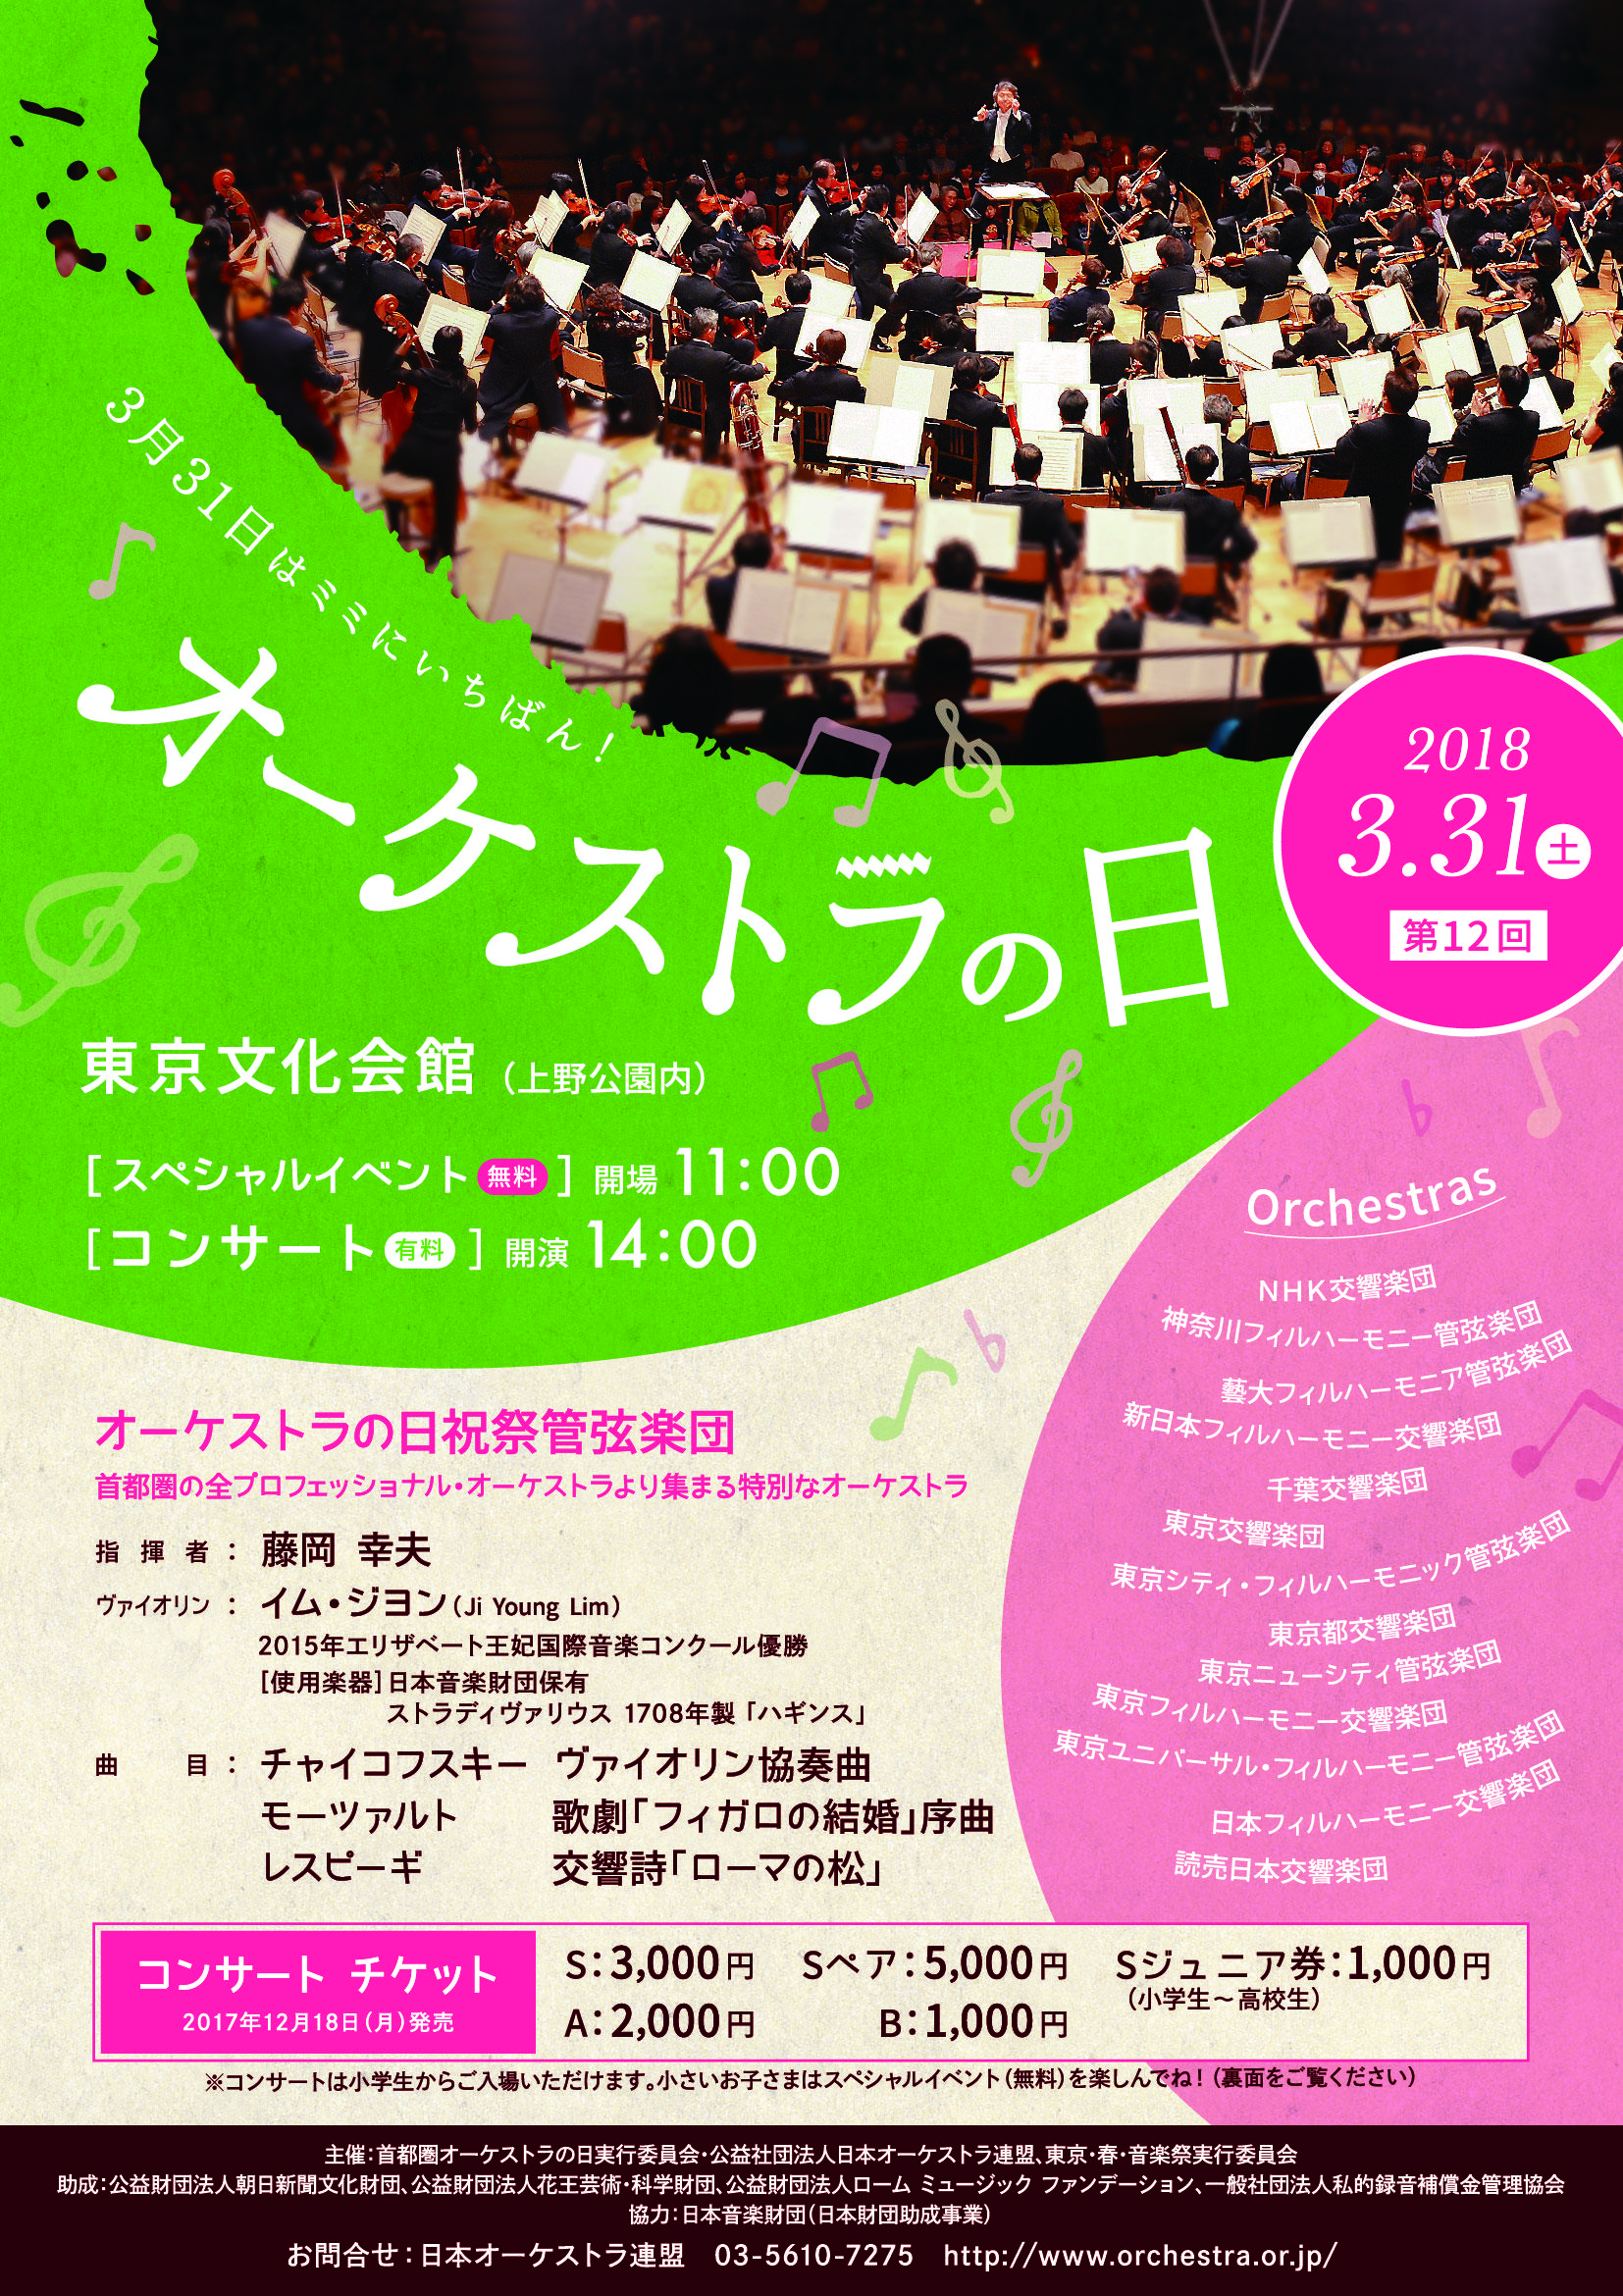 https://www.orchestra.or.jp/concerts/uploads/f_orchestraday2018_A4_omote.jpg